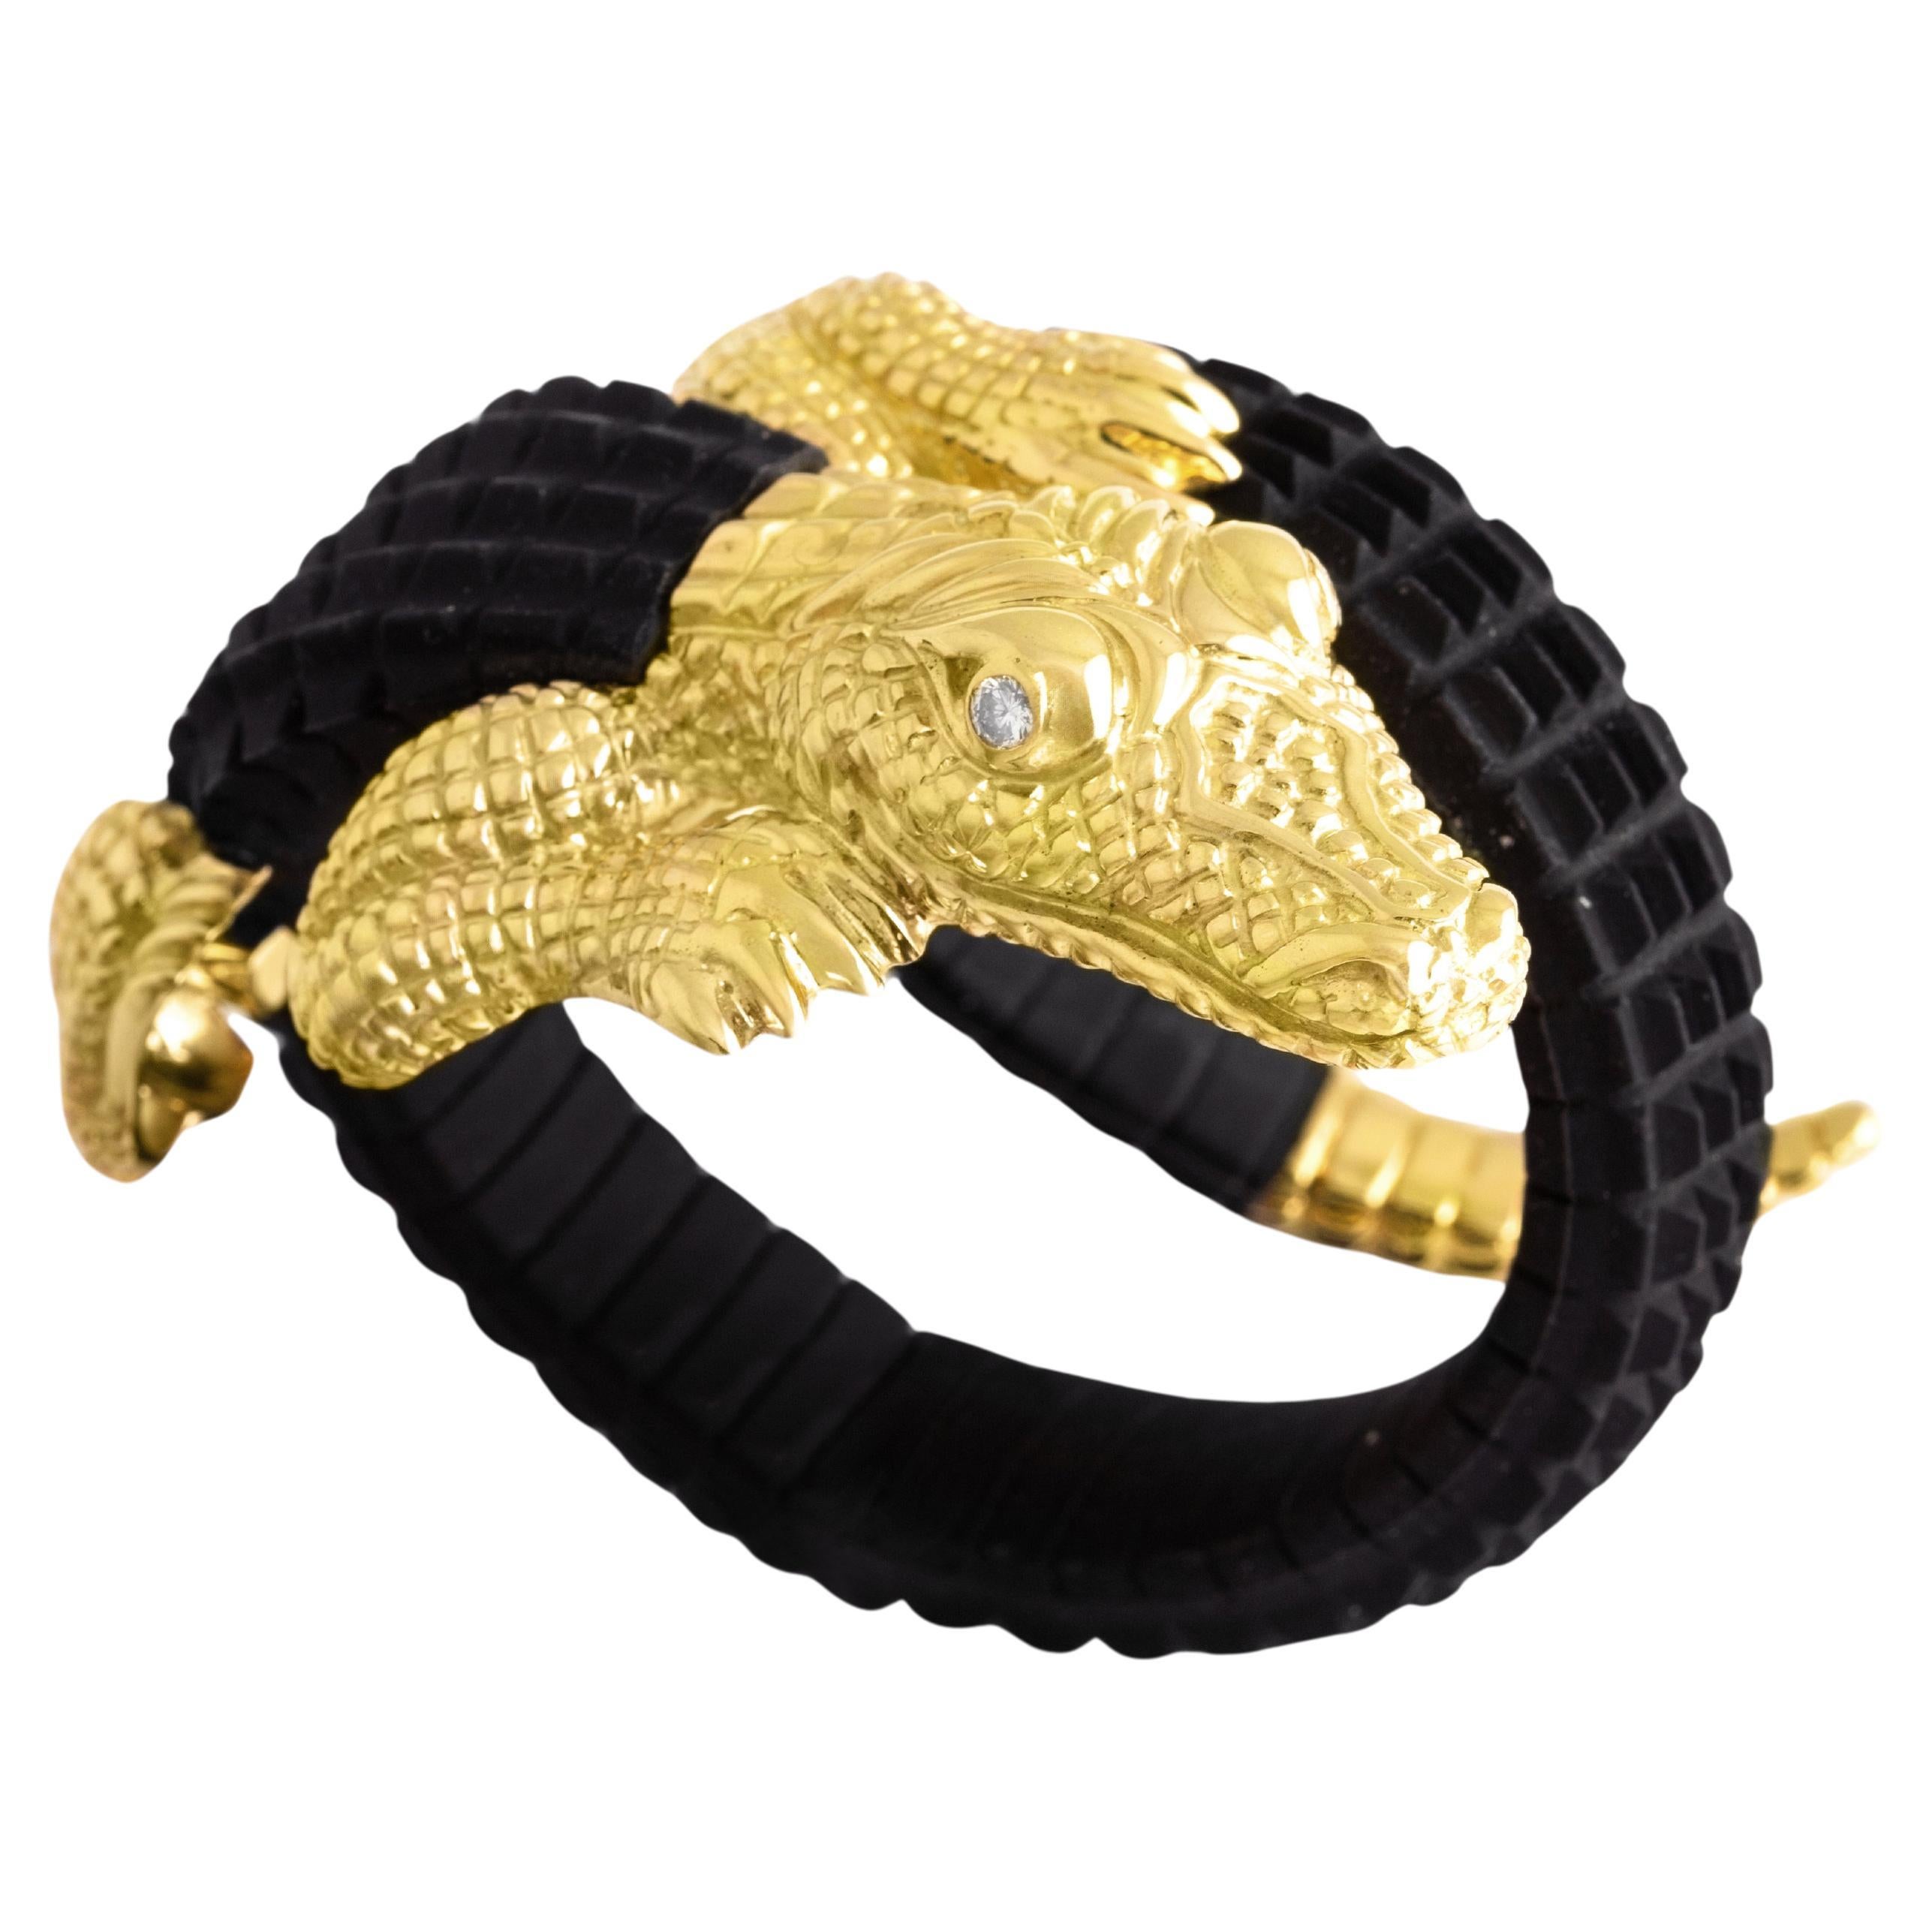 You will want to wrap this artfully sculpted creature around your wrist. Big, bold, and realistically rendered in 18K yellow gold and black rubber, this remarkable reptile has a satiny finish with shimmering highlights. 
The eyes are set with